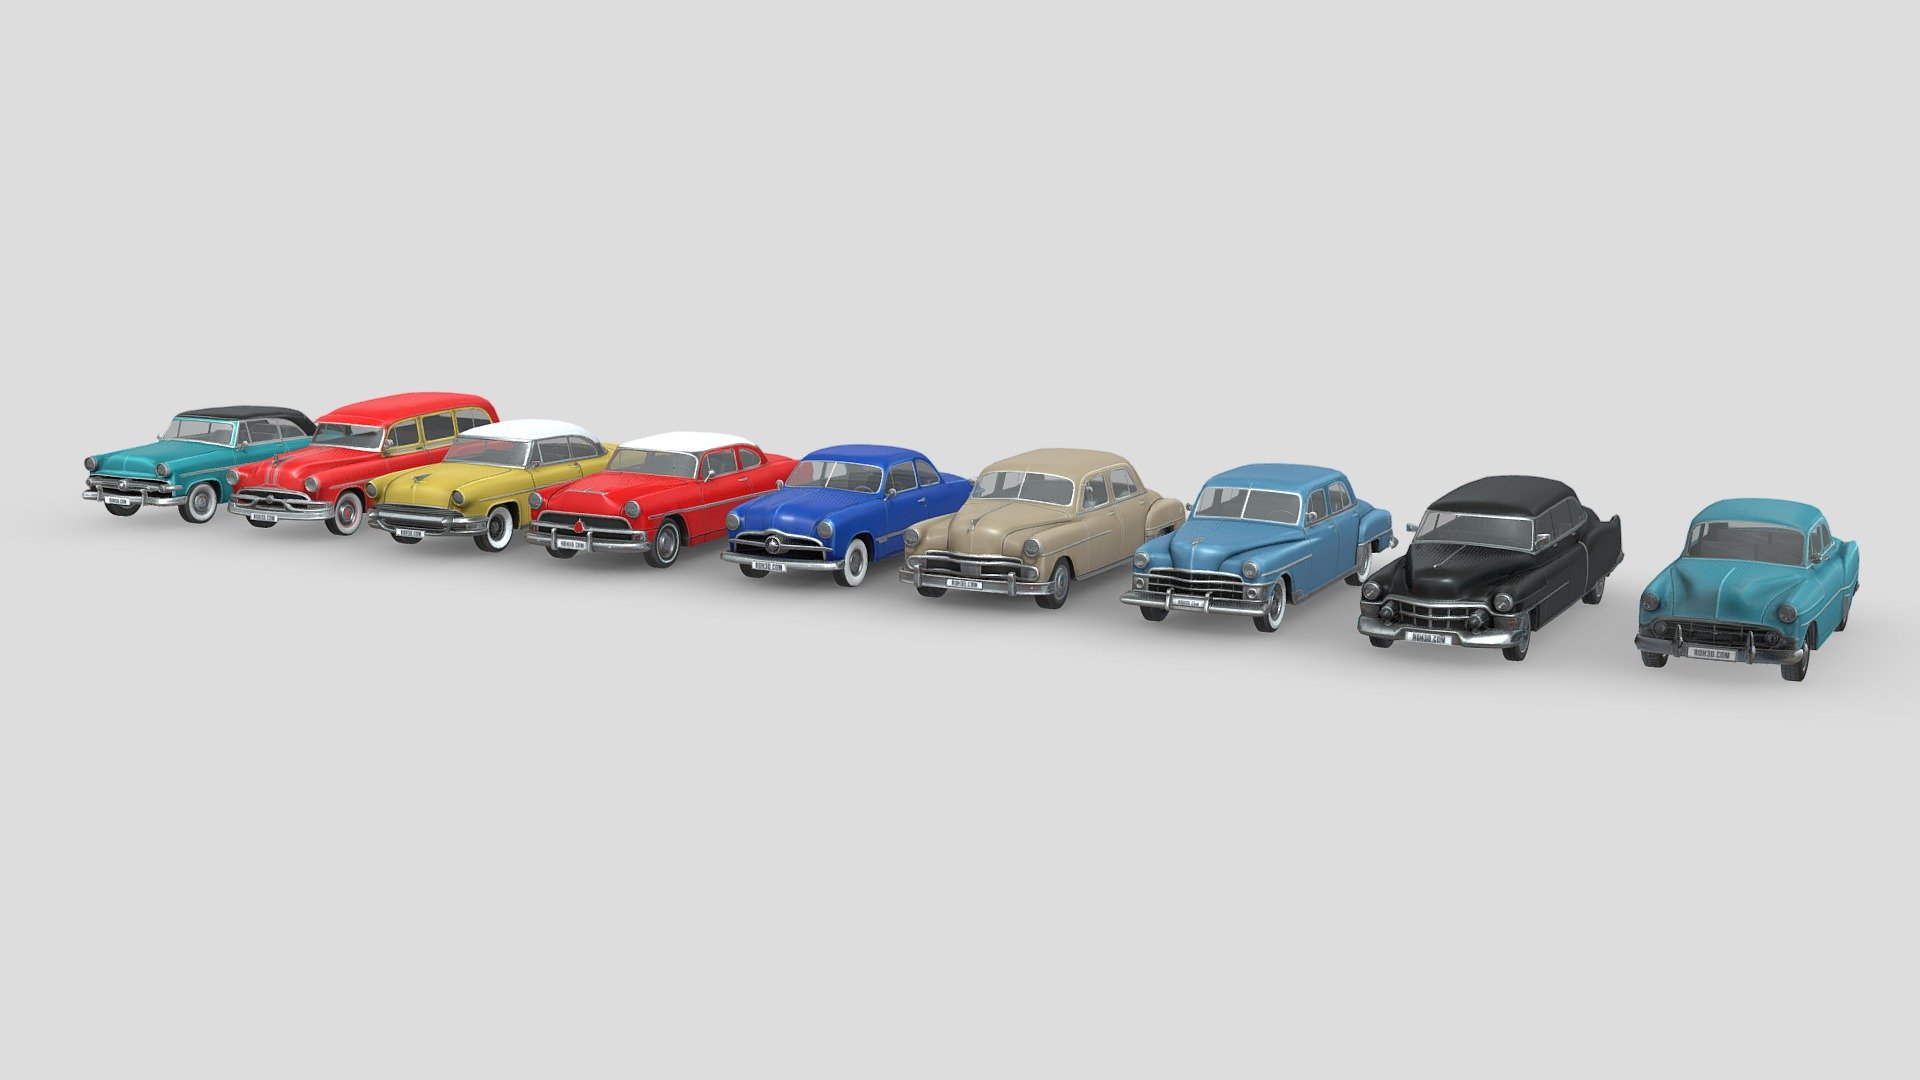 This models pack contain 9 different cars, with nice and clean geometry.

Features :
- Low poly cars, each cars only have about 7k polygons.
- It’s included PSD file, so you can easily change the color (Using Photoshop).
- Nice detail, thanks to the baked-textures in 4K size.

Cars included in this pack:
- Cadillac 75 Sedan 1953
- Chevrolet Club Coupe 1953
- Chrysler NewYorker 1950
- Dodge Coronet Mk1 1950
- Ford Crestline Sunliner 1954
- Ford Custom Club Coupe 1949
- Hudson Hornet 1943
- Lincoln Capri Hardtop Coupe 1955
- Pontiac Chieftain Deluxe Station Wagon 1953

Buying this collection, you will save a large amount of money! - Low Poly Cars Collection 005 - 50s Cars - Buy Royalty Free 3D model by ROH3D 3d model